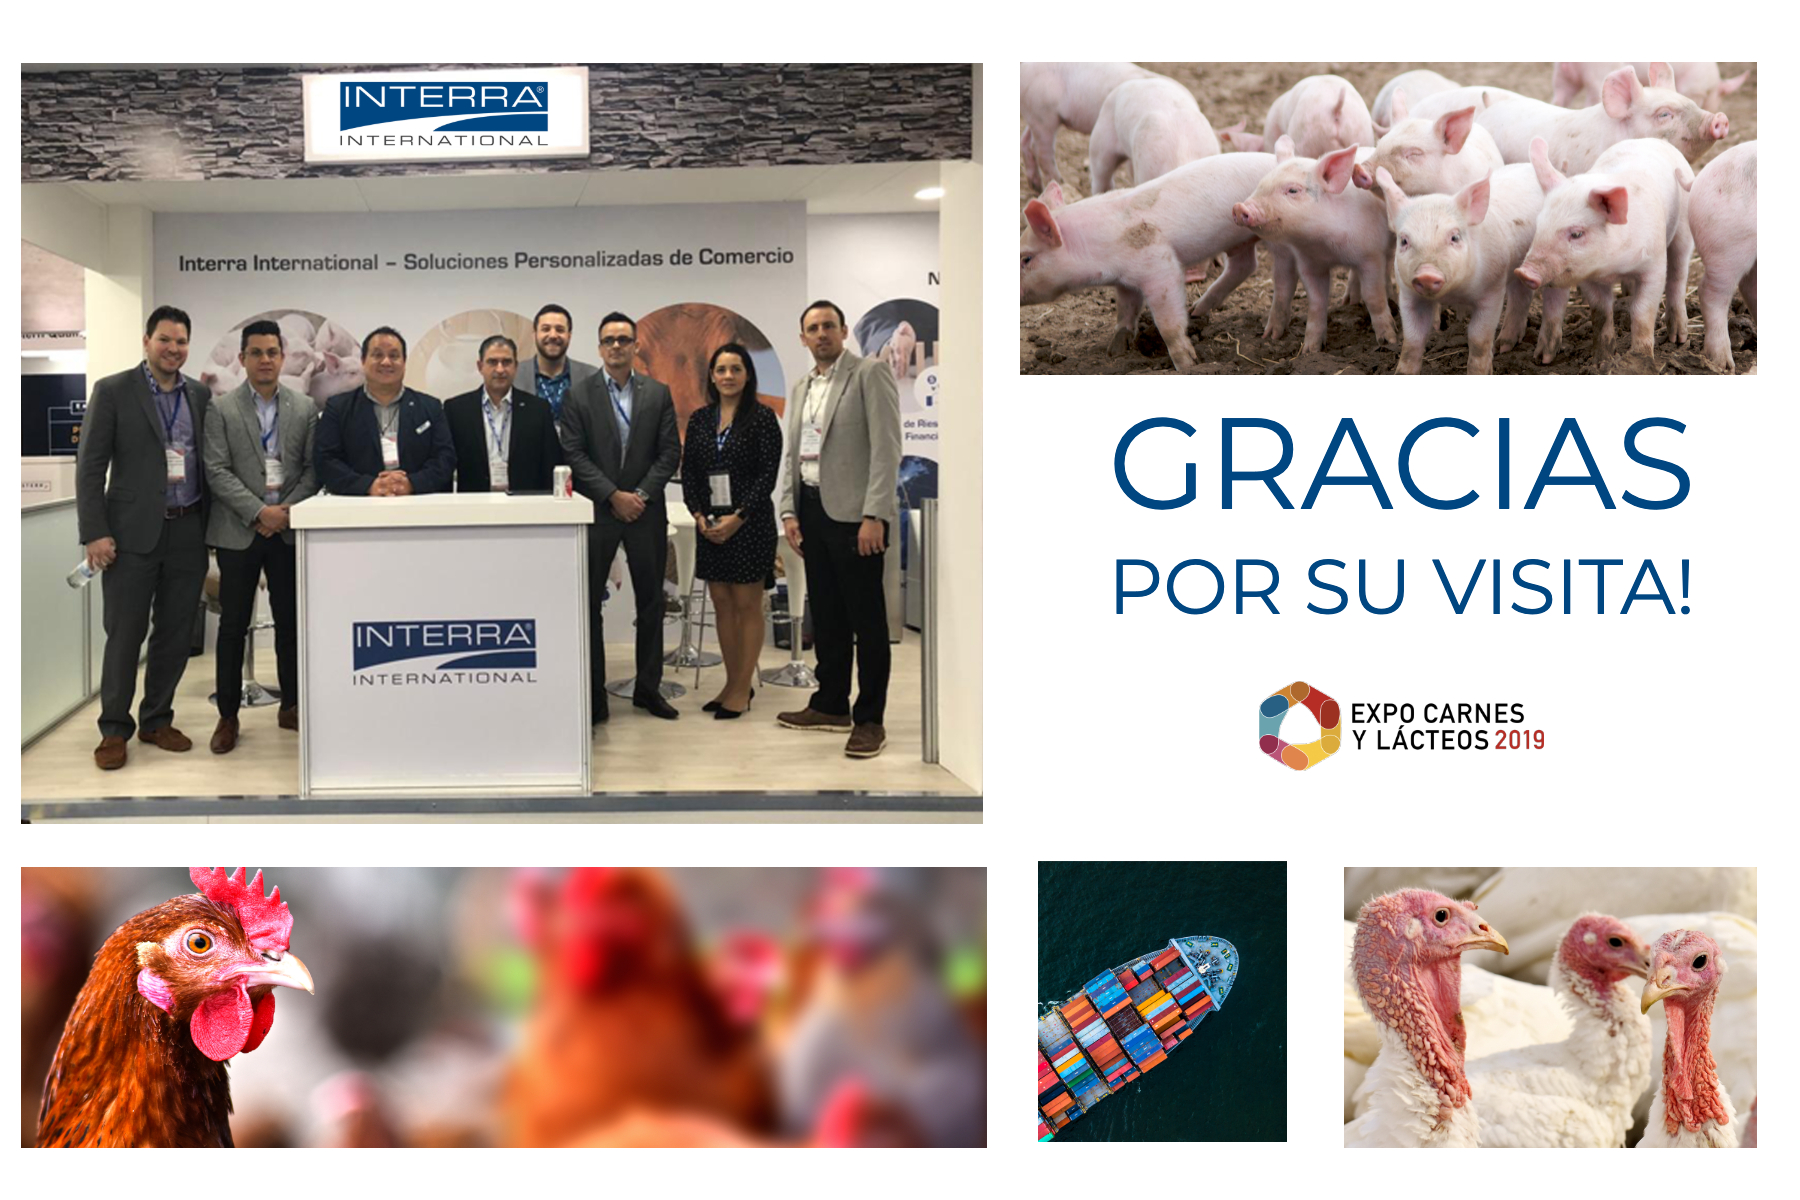 Thank you for Visiting Us at Expo Carnes y Lácteos! Interra International